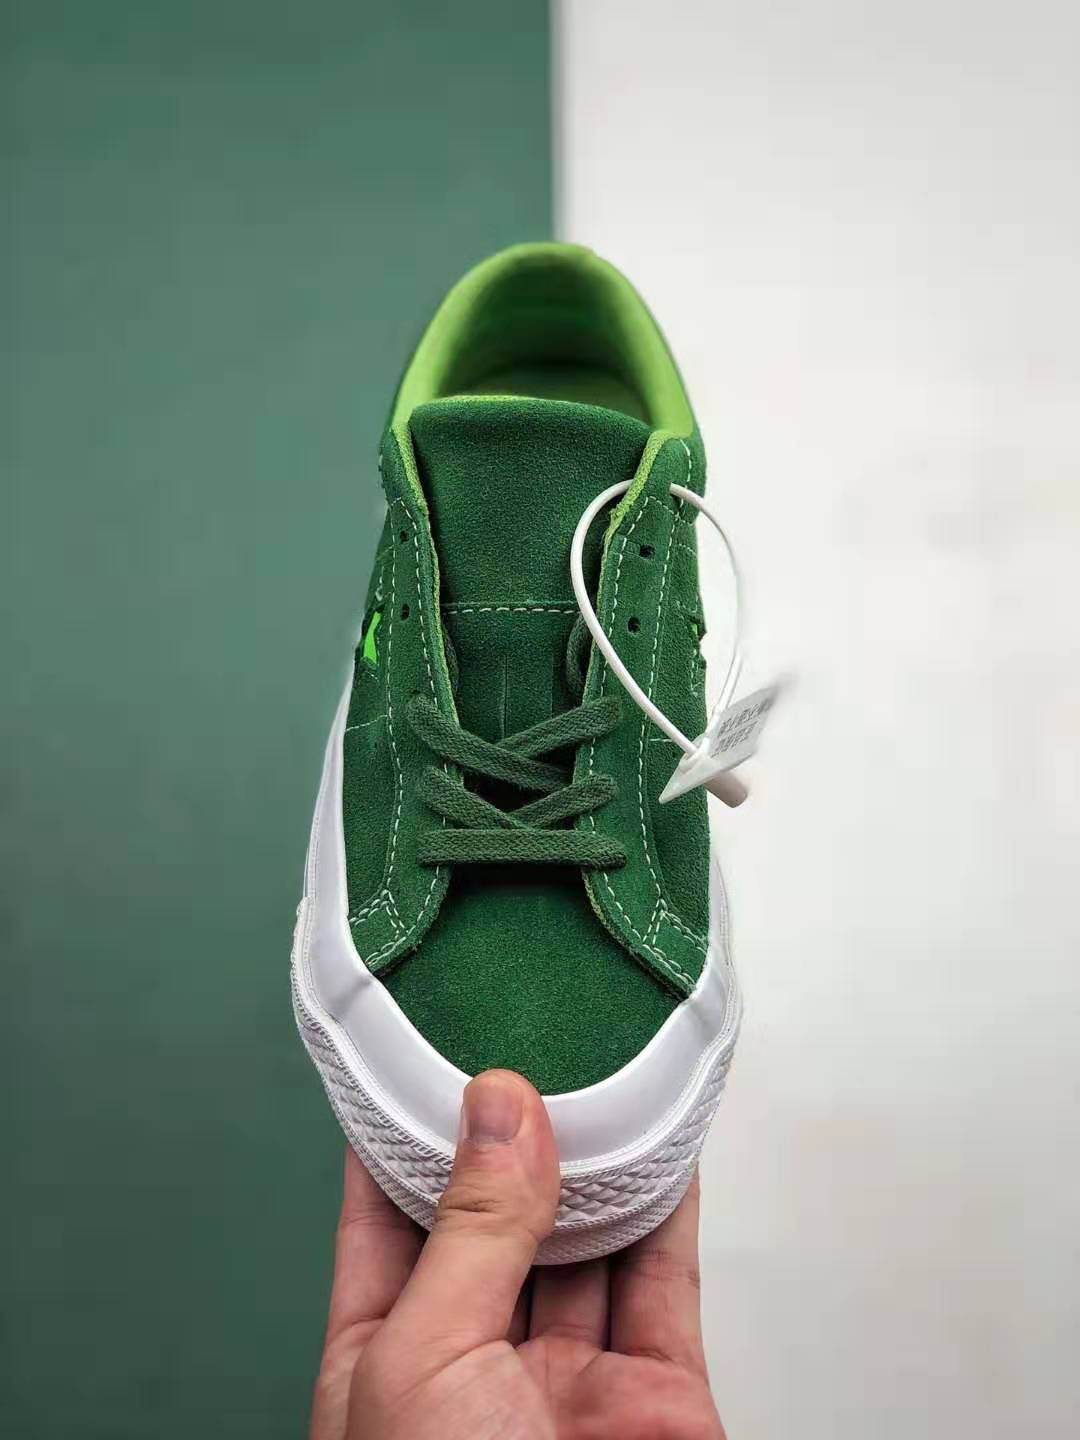 Converse One Star Low 'Mint Green' 159816C - Stylish and Fresh Footwear